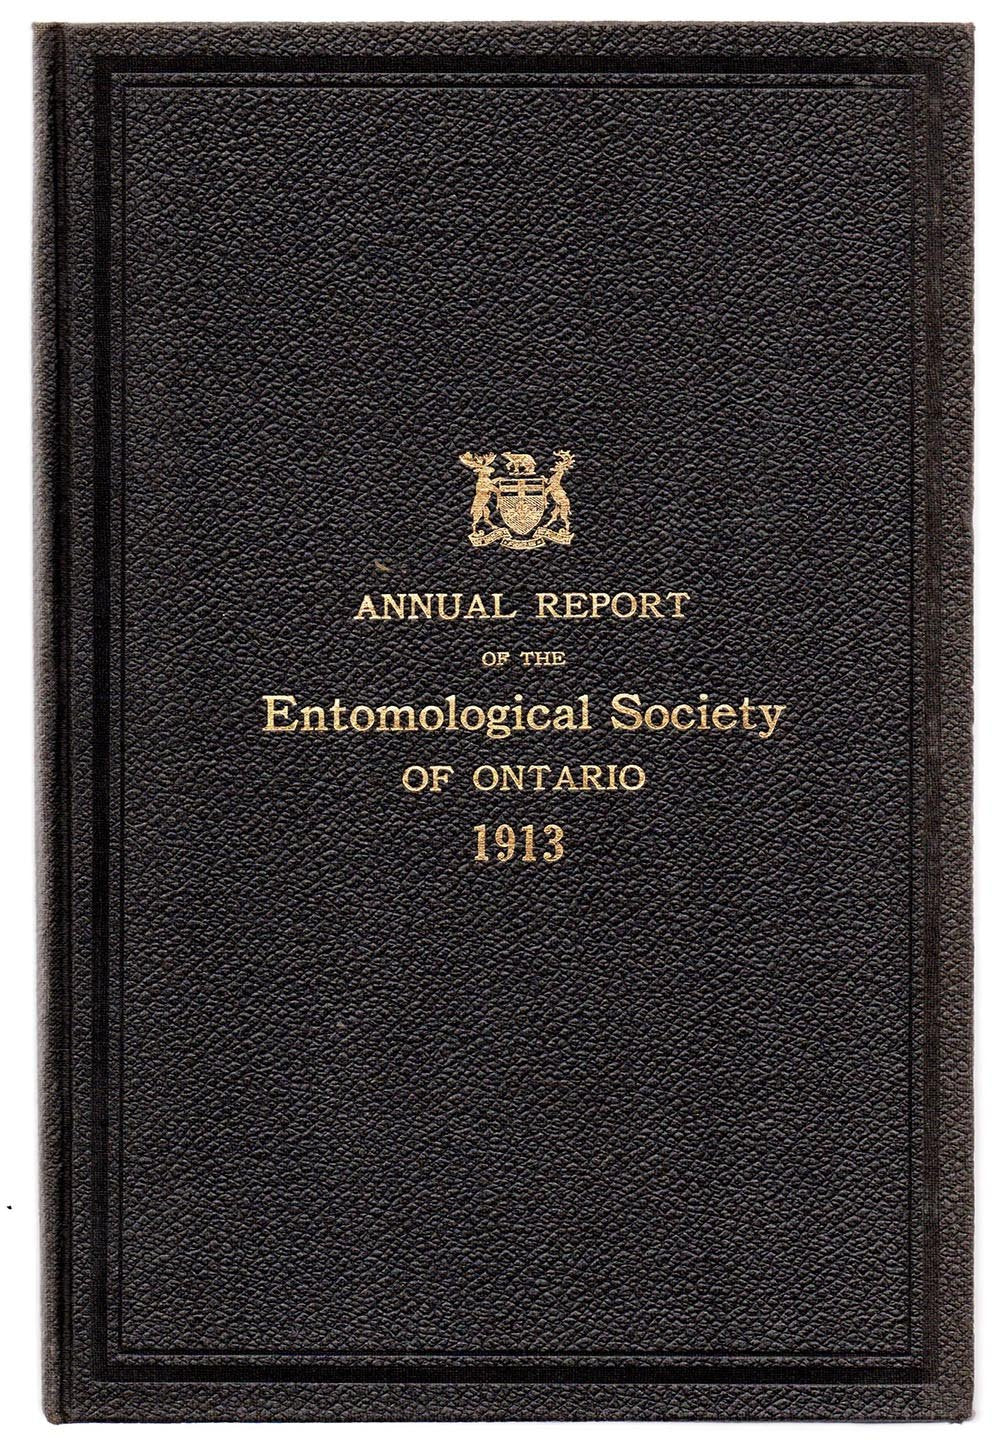 Forty-fourth Annual Report of the Entomological Society of Ontario 1913